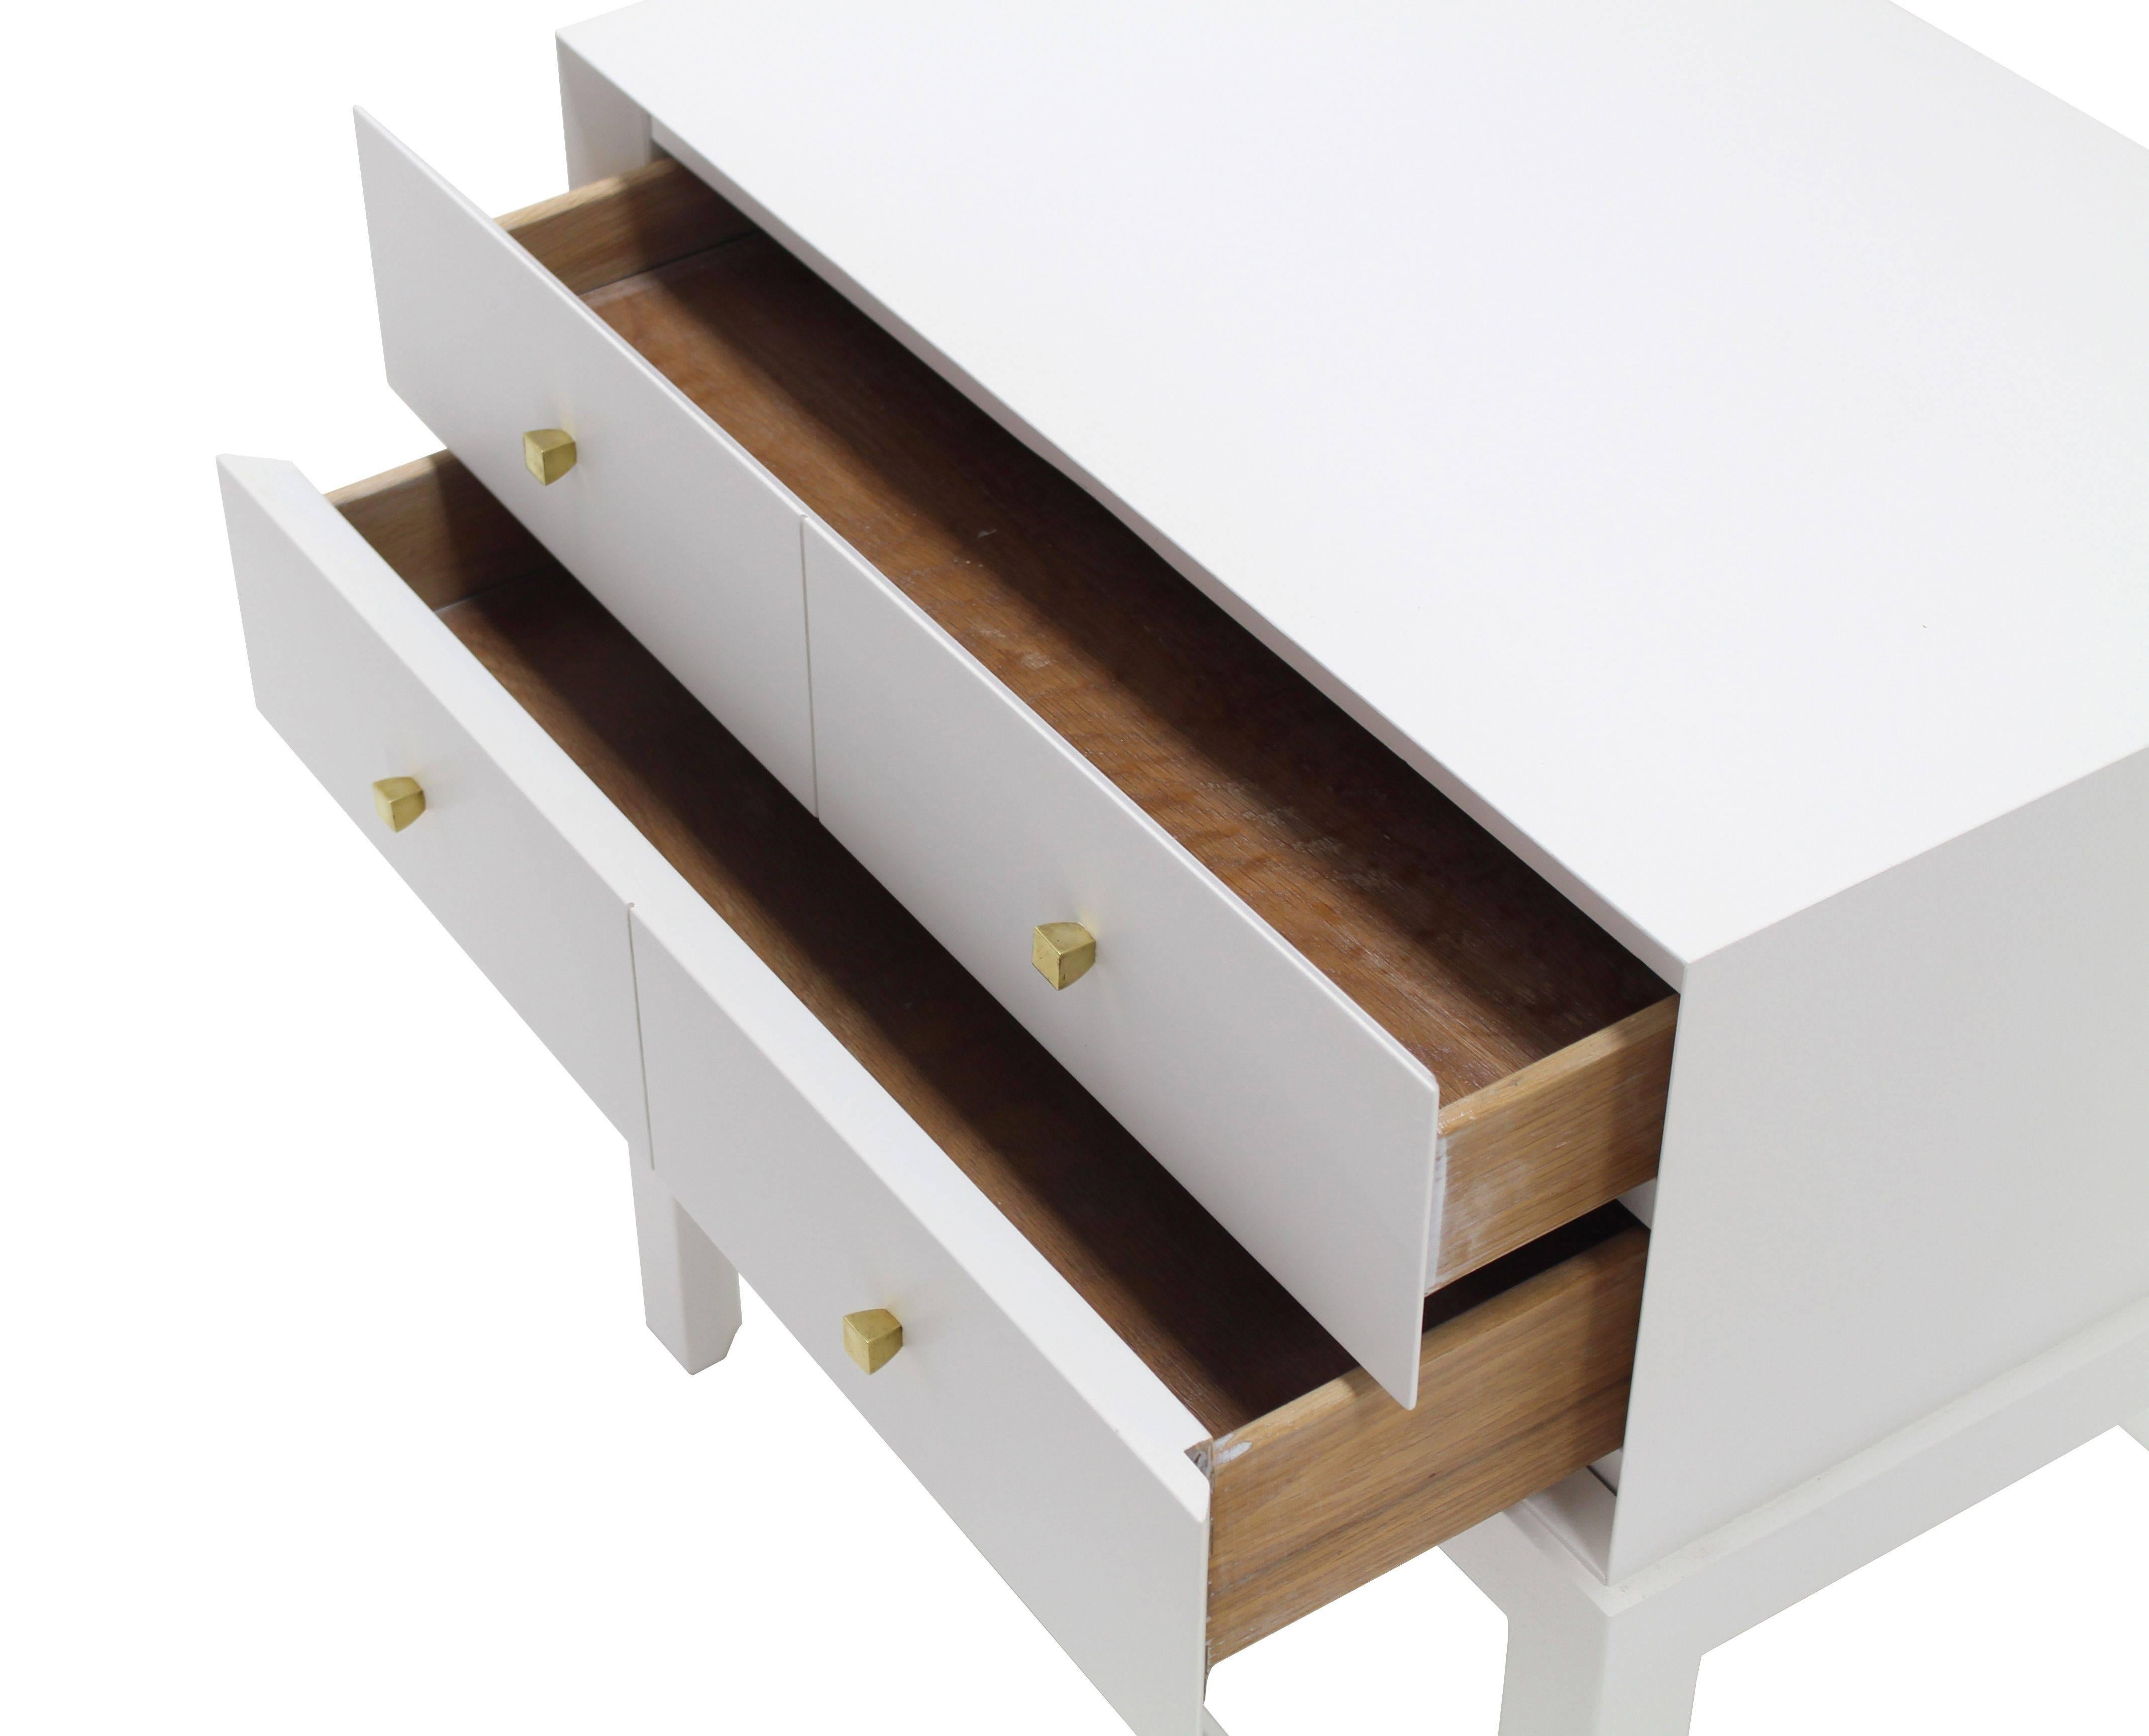 20th Century White Lacquer Diamond Shape Brass Dimond Pulls Two Drawer Nightstand For Sale